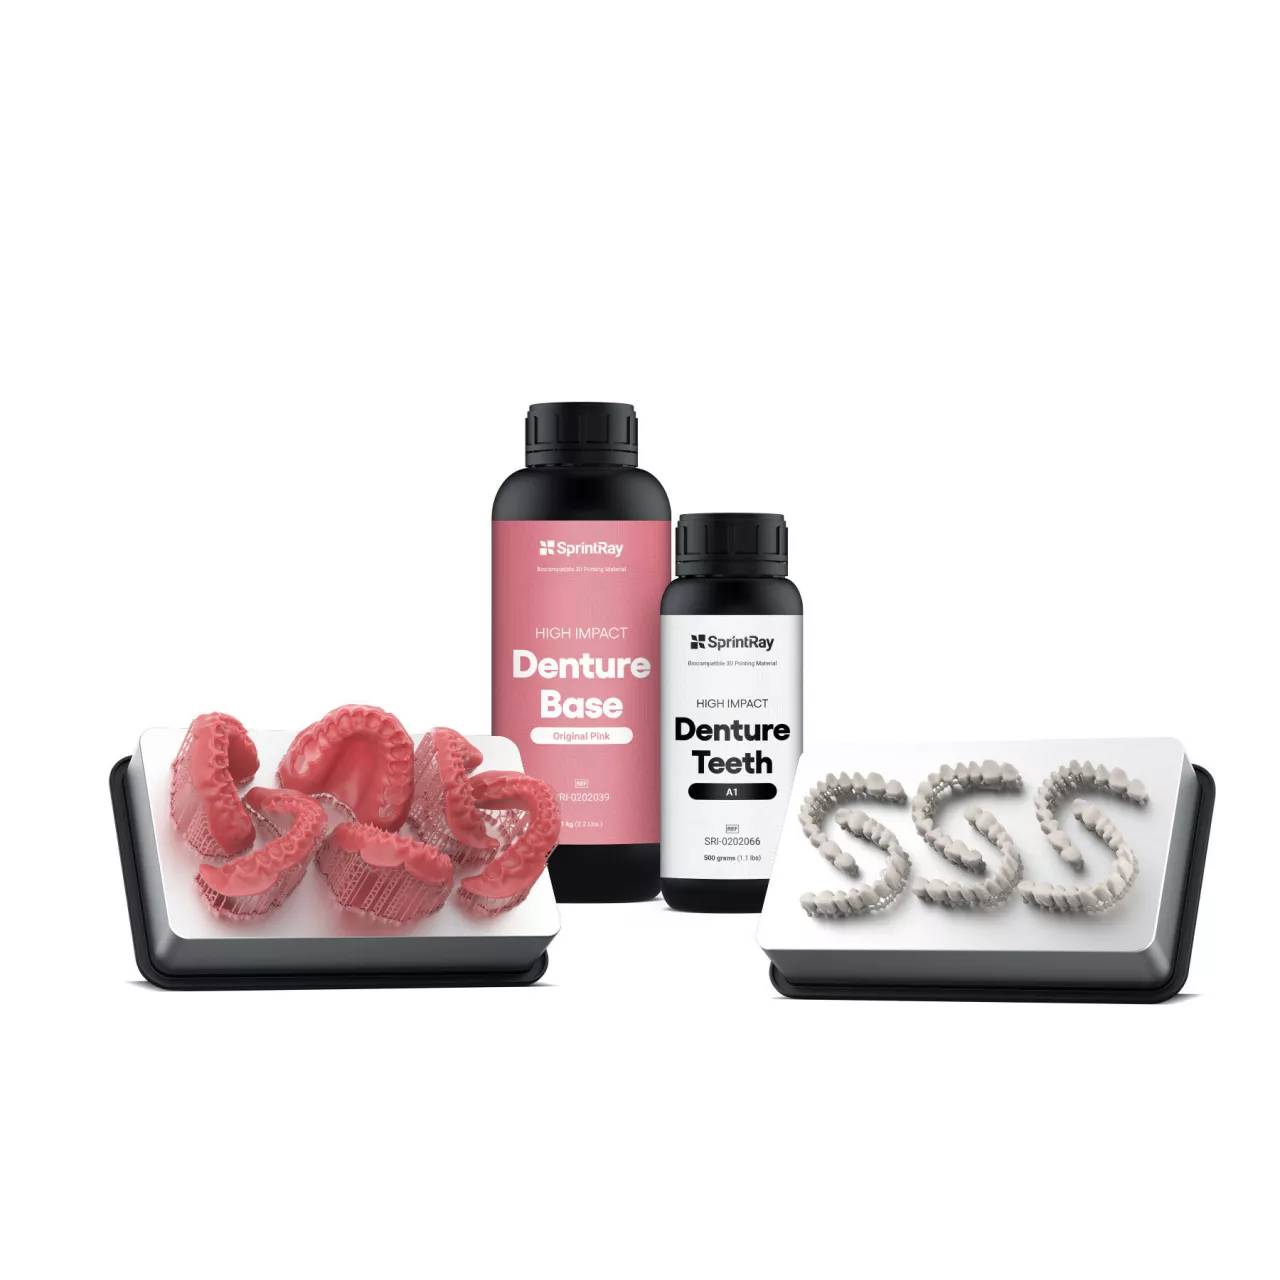 SprintRay Launches Ceramic-Infused 3D Printing Resins for High Performance Dentures img#4